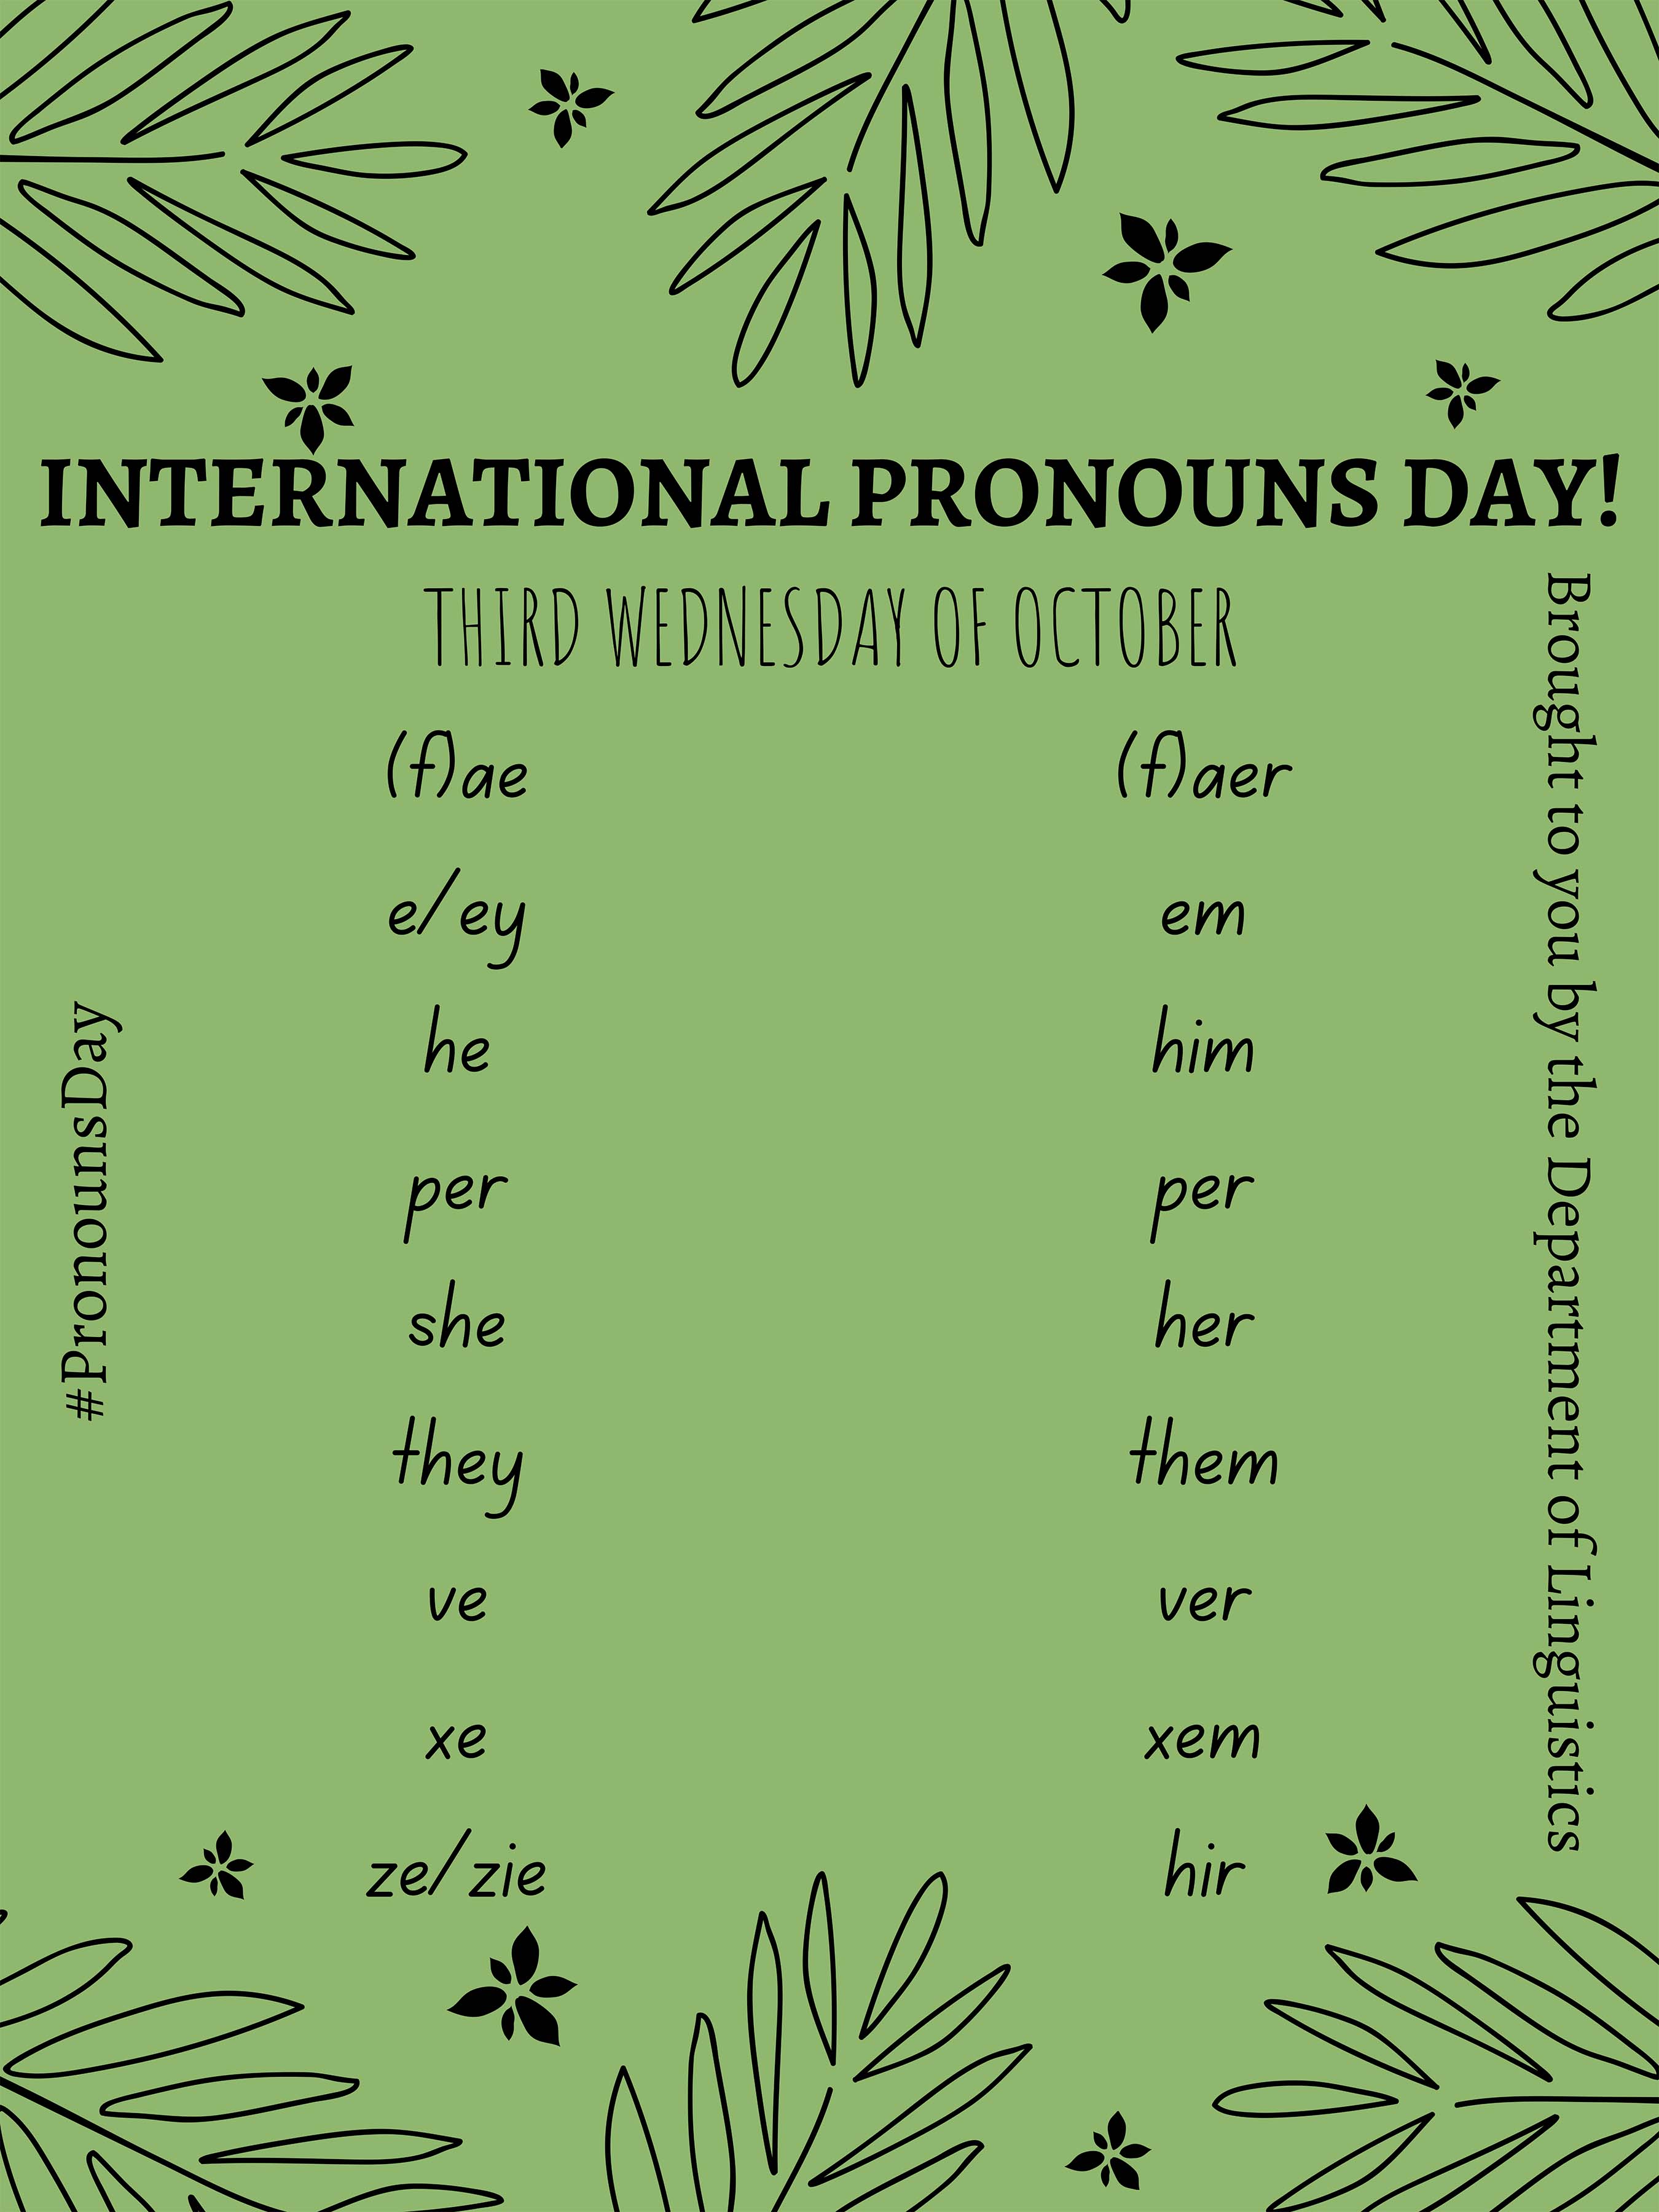 International Pronouns Day is the 3rd Wednesday of October. Click on image to see full description.